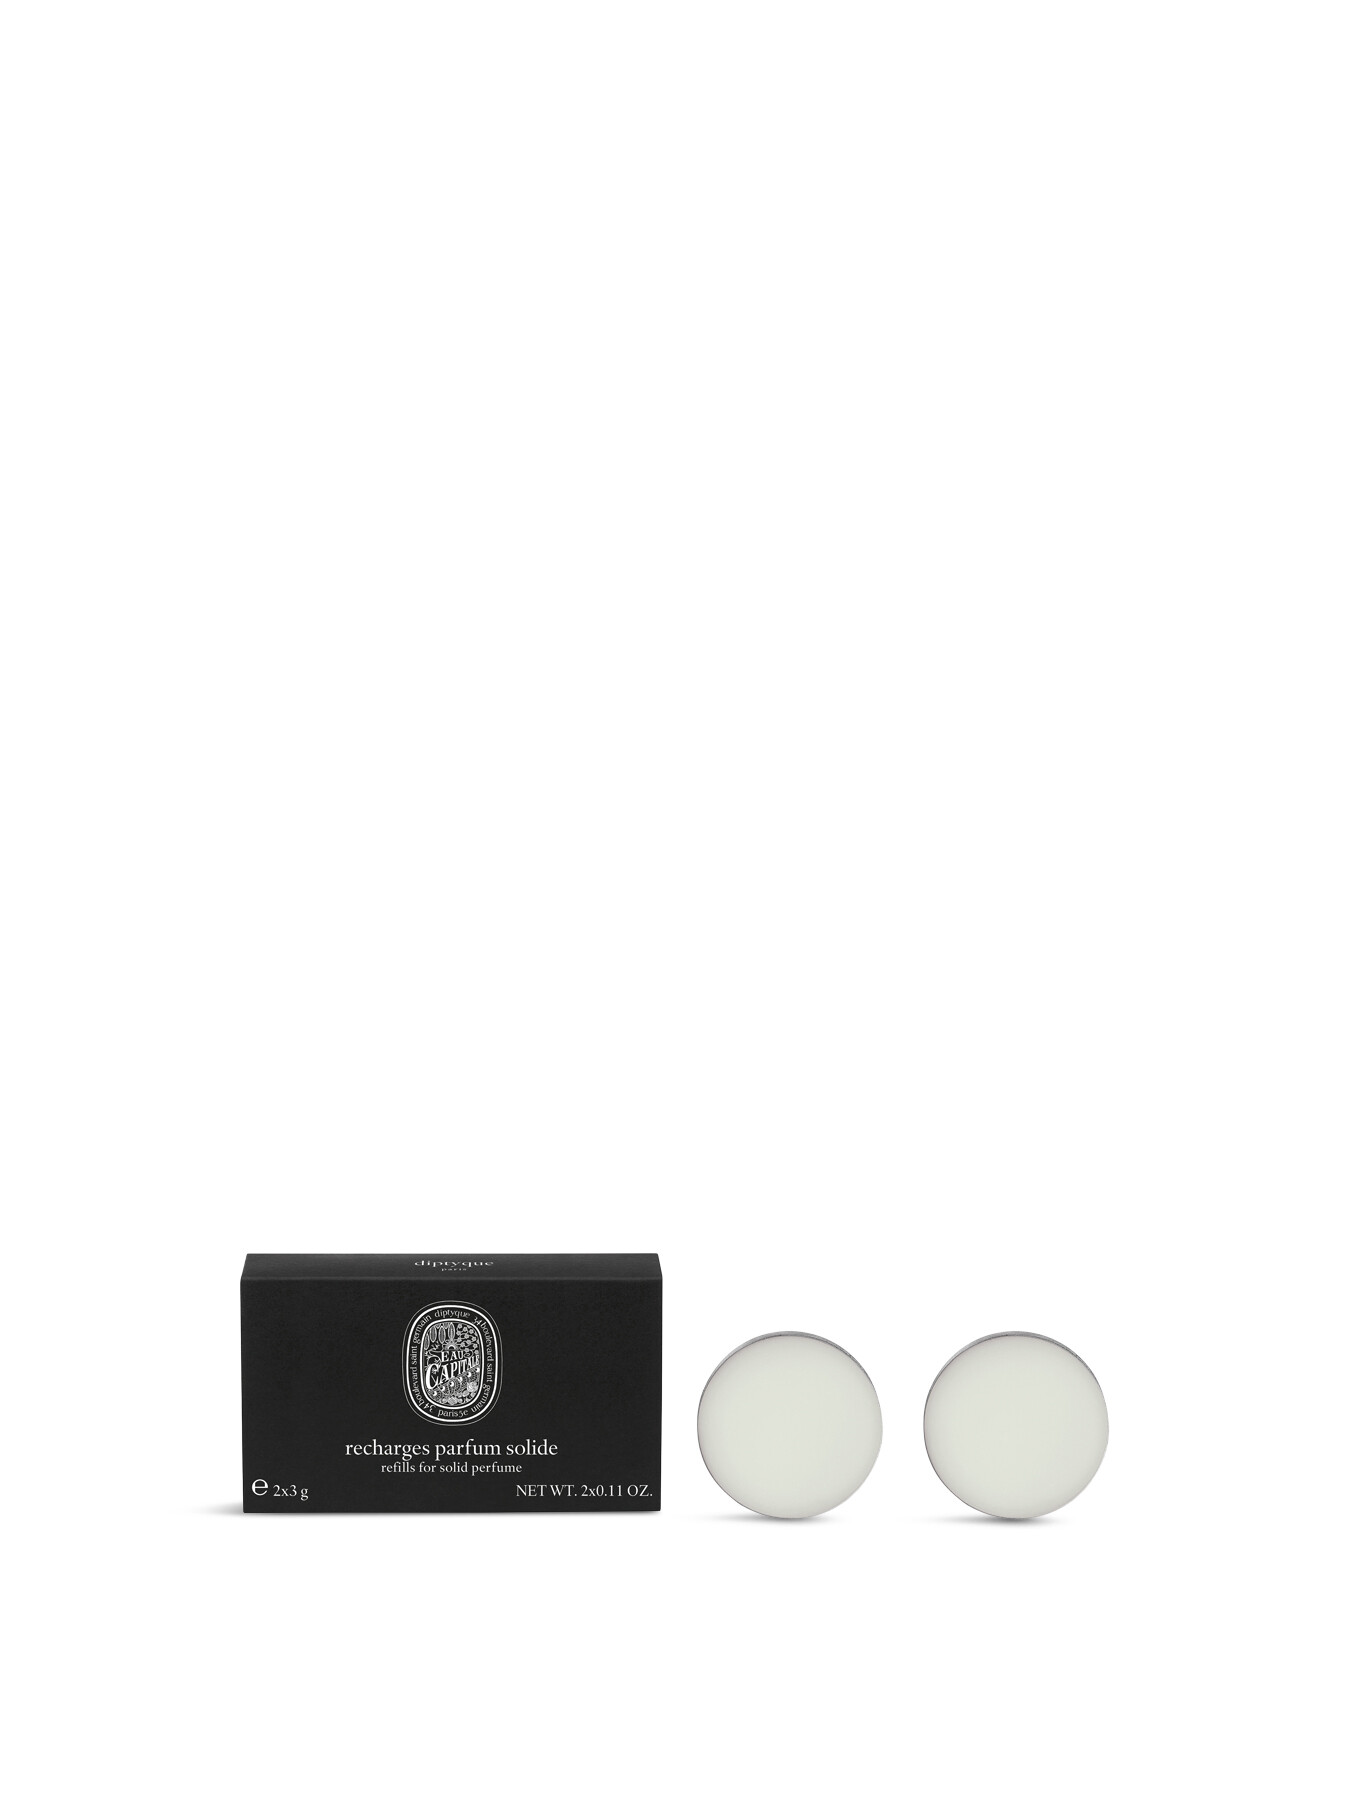 Diptyque Refill X 2 Solid Perfume Capitale 3g In White